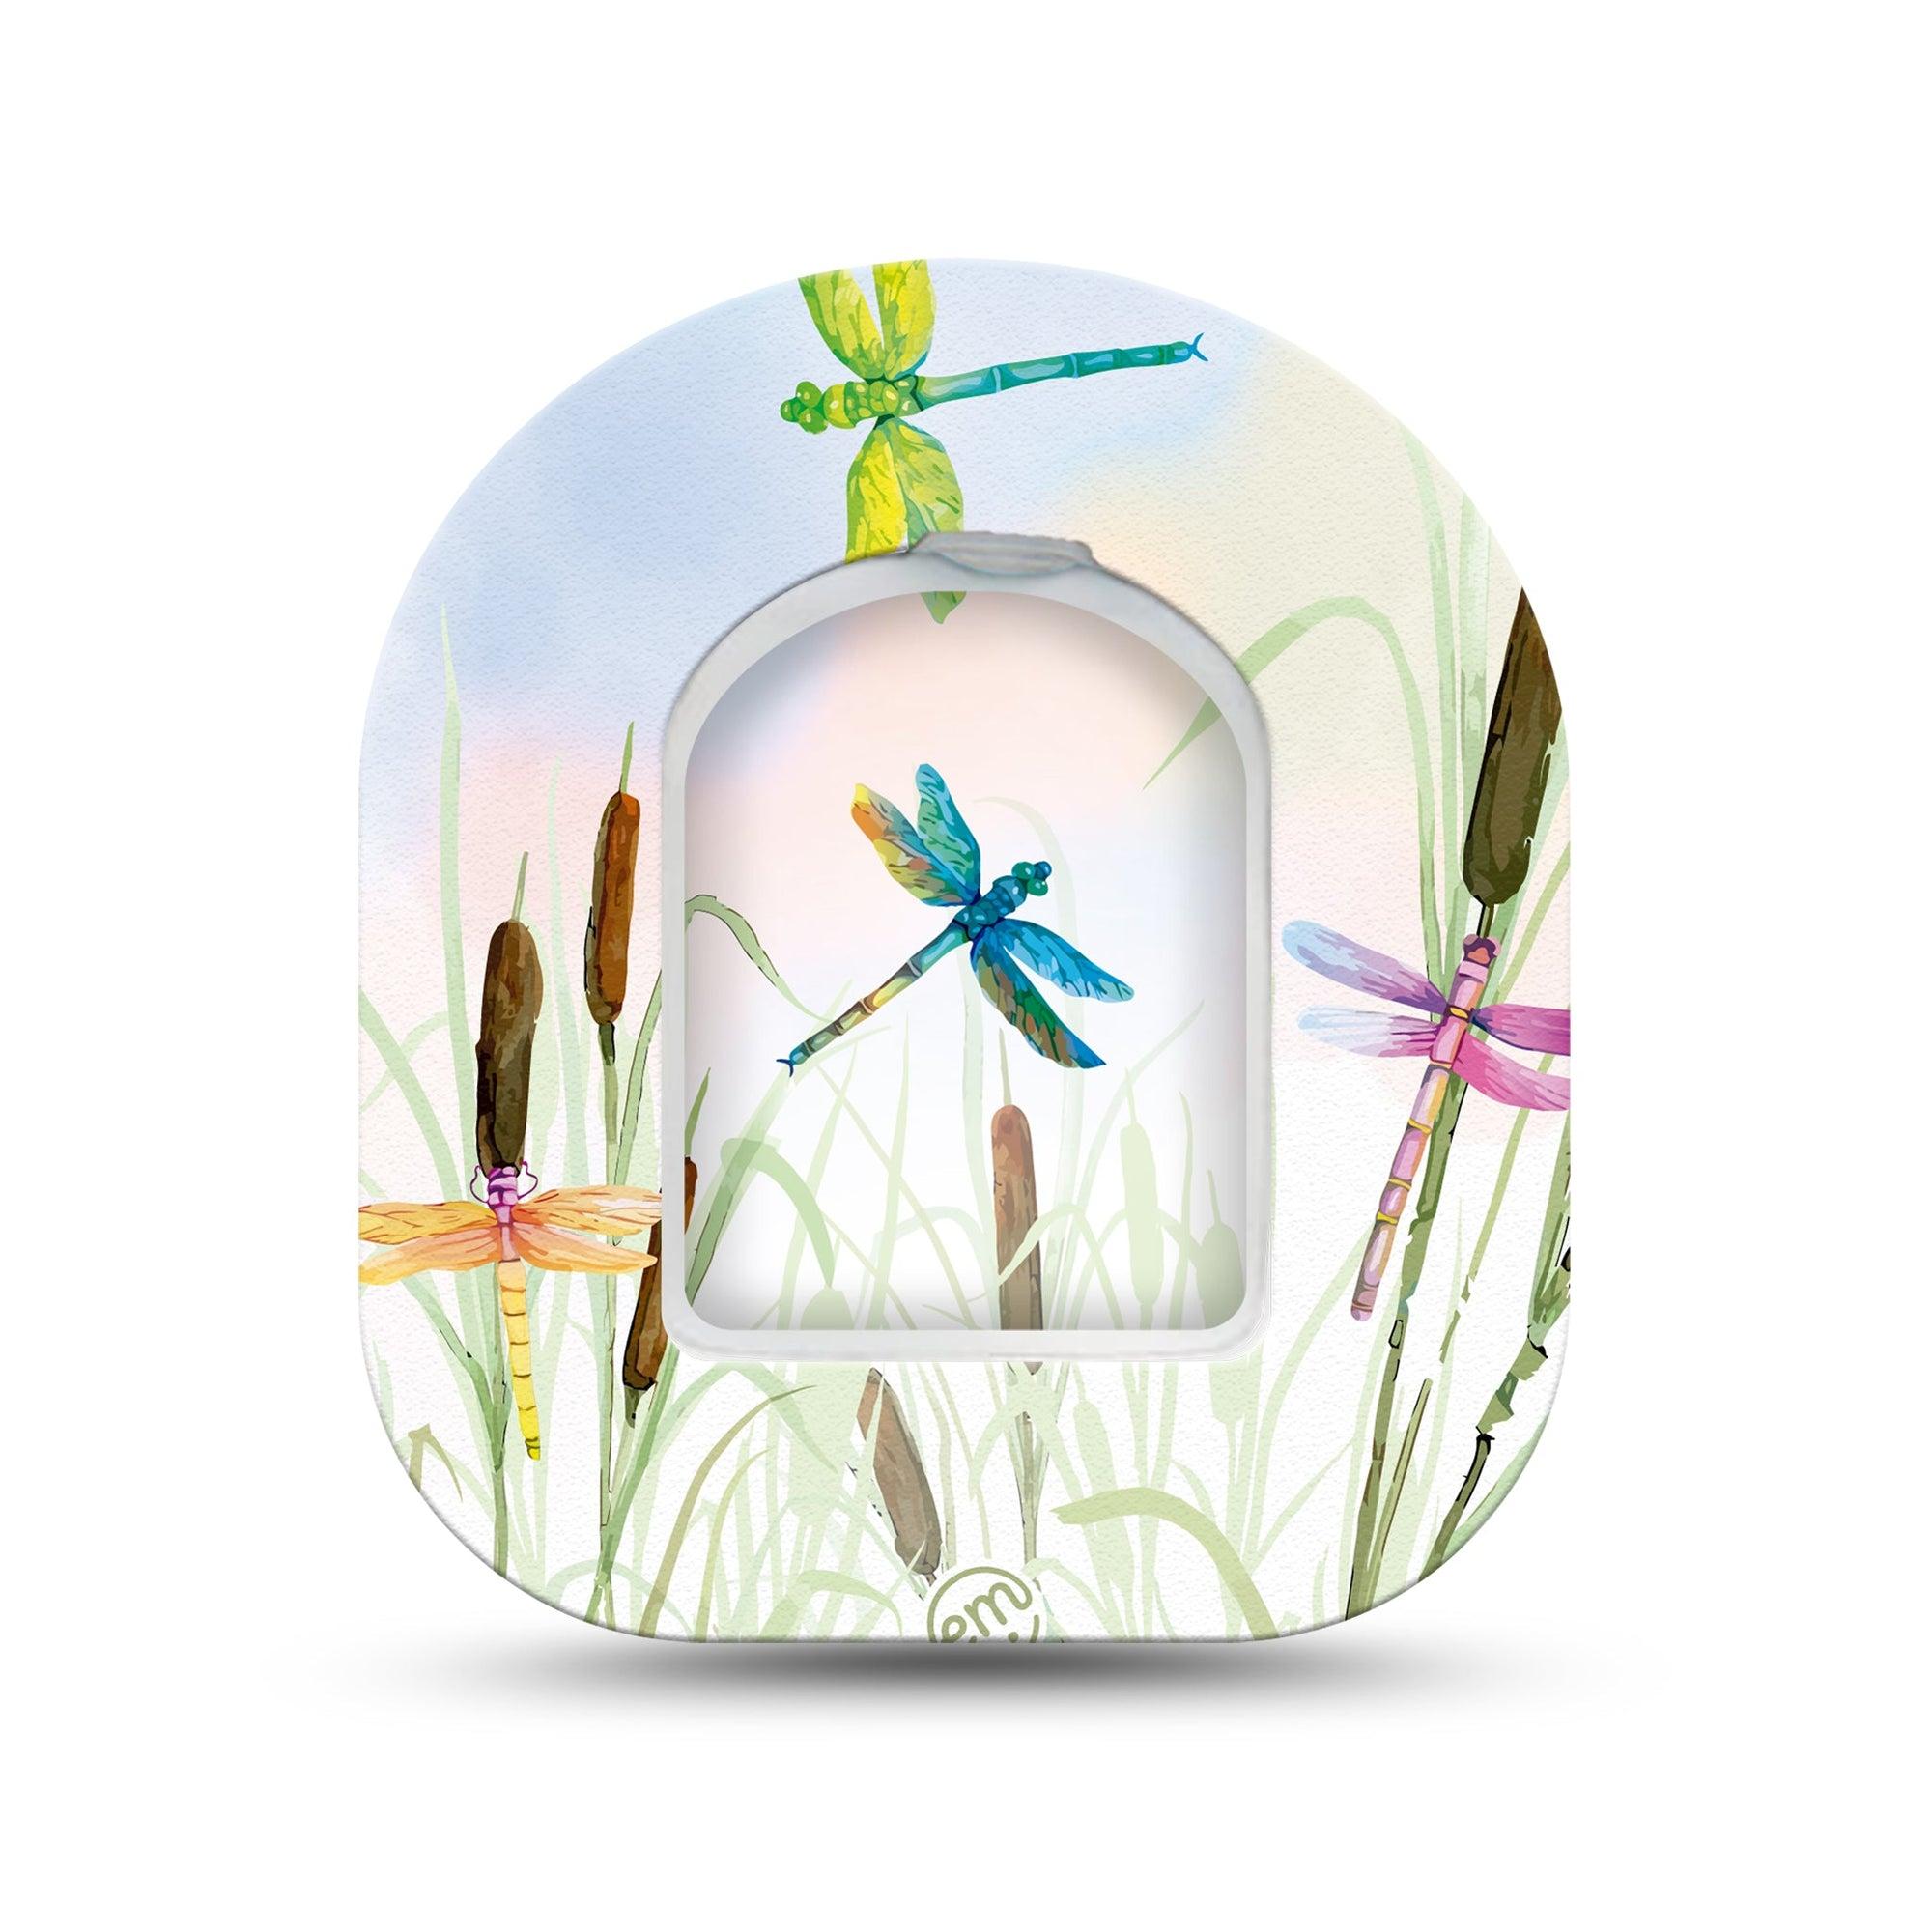 ExpressionMed Dragonfly Omnipod Surface Center Sticker and Mini Tape Grass Field Inspired Vinyl Sticker and Tape Design Pump Design